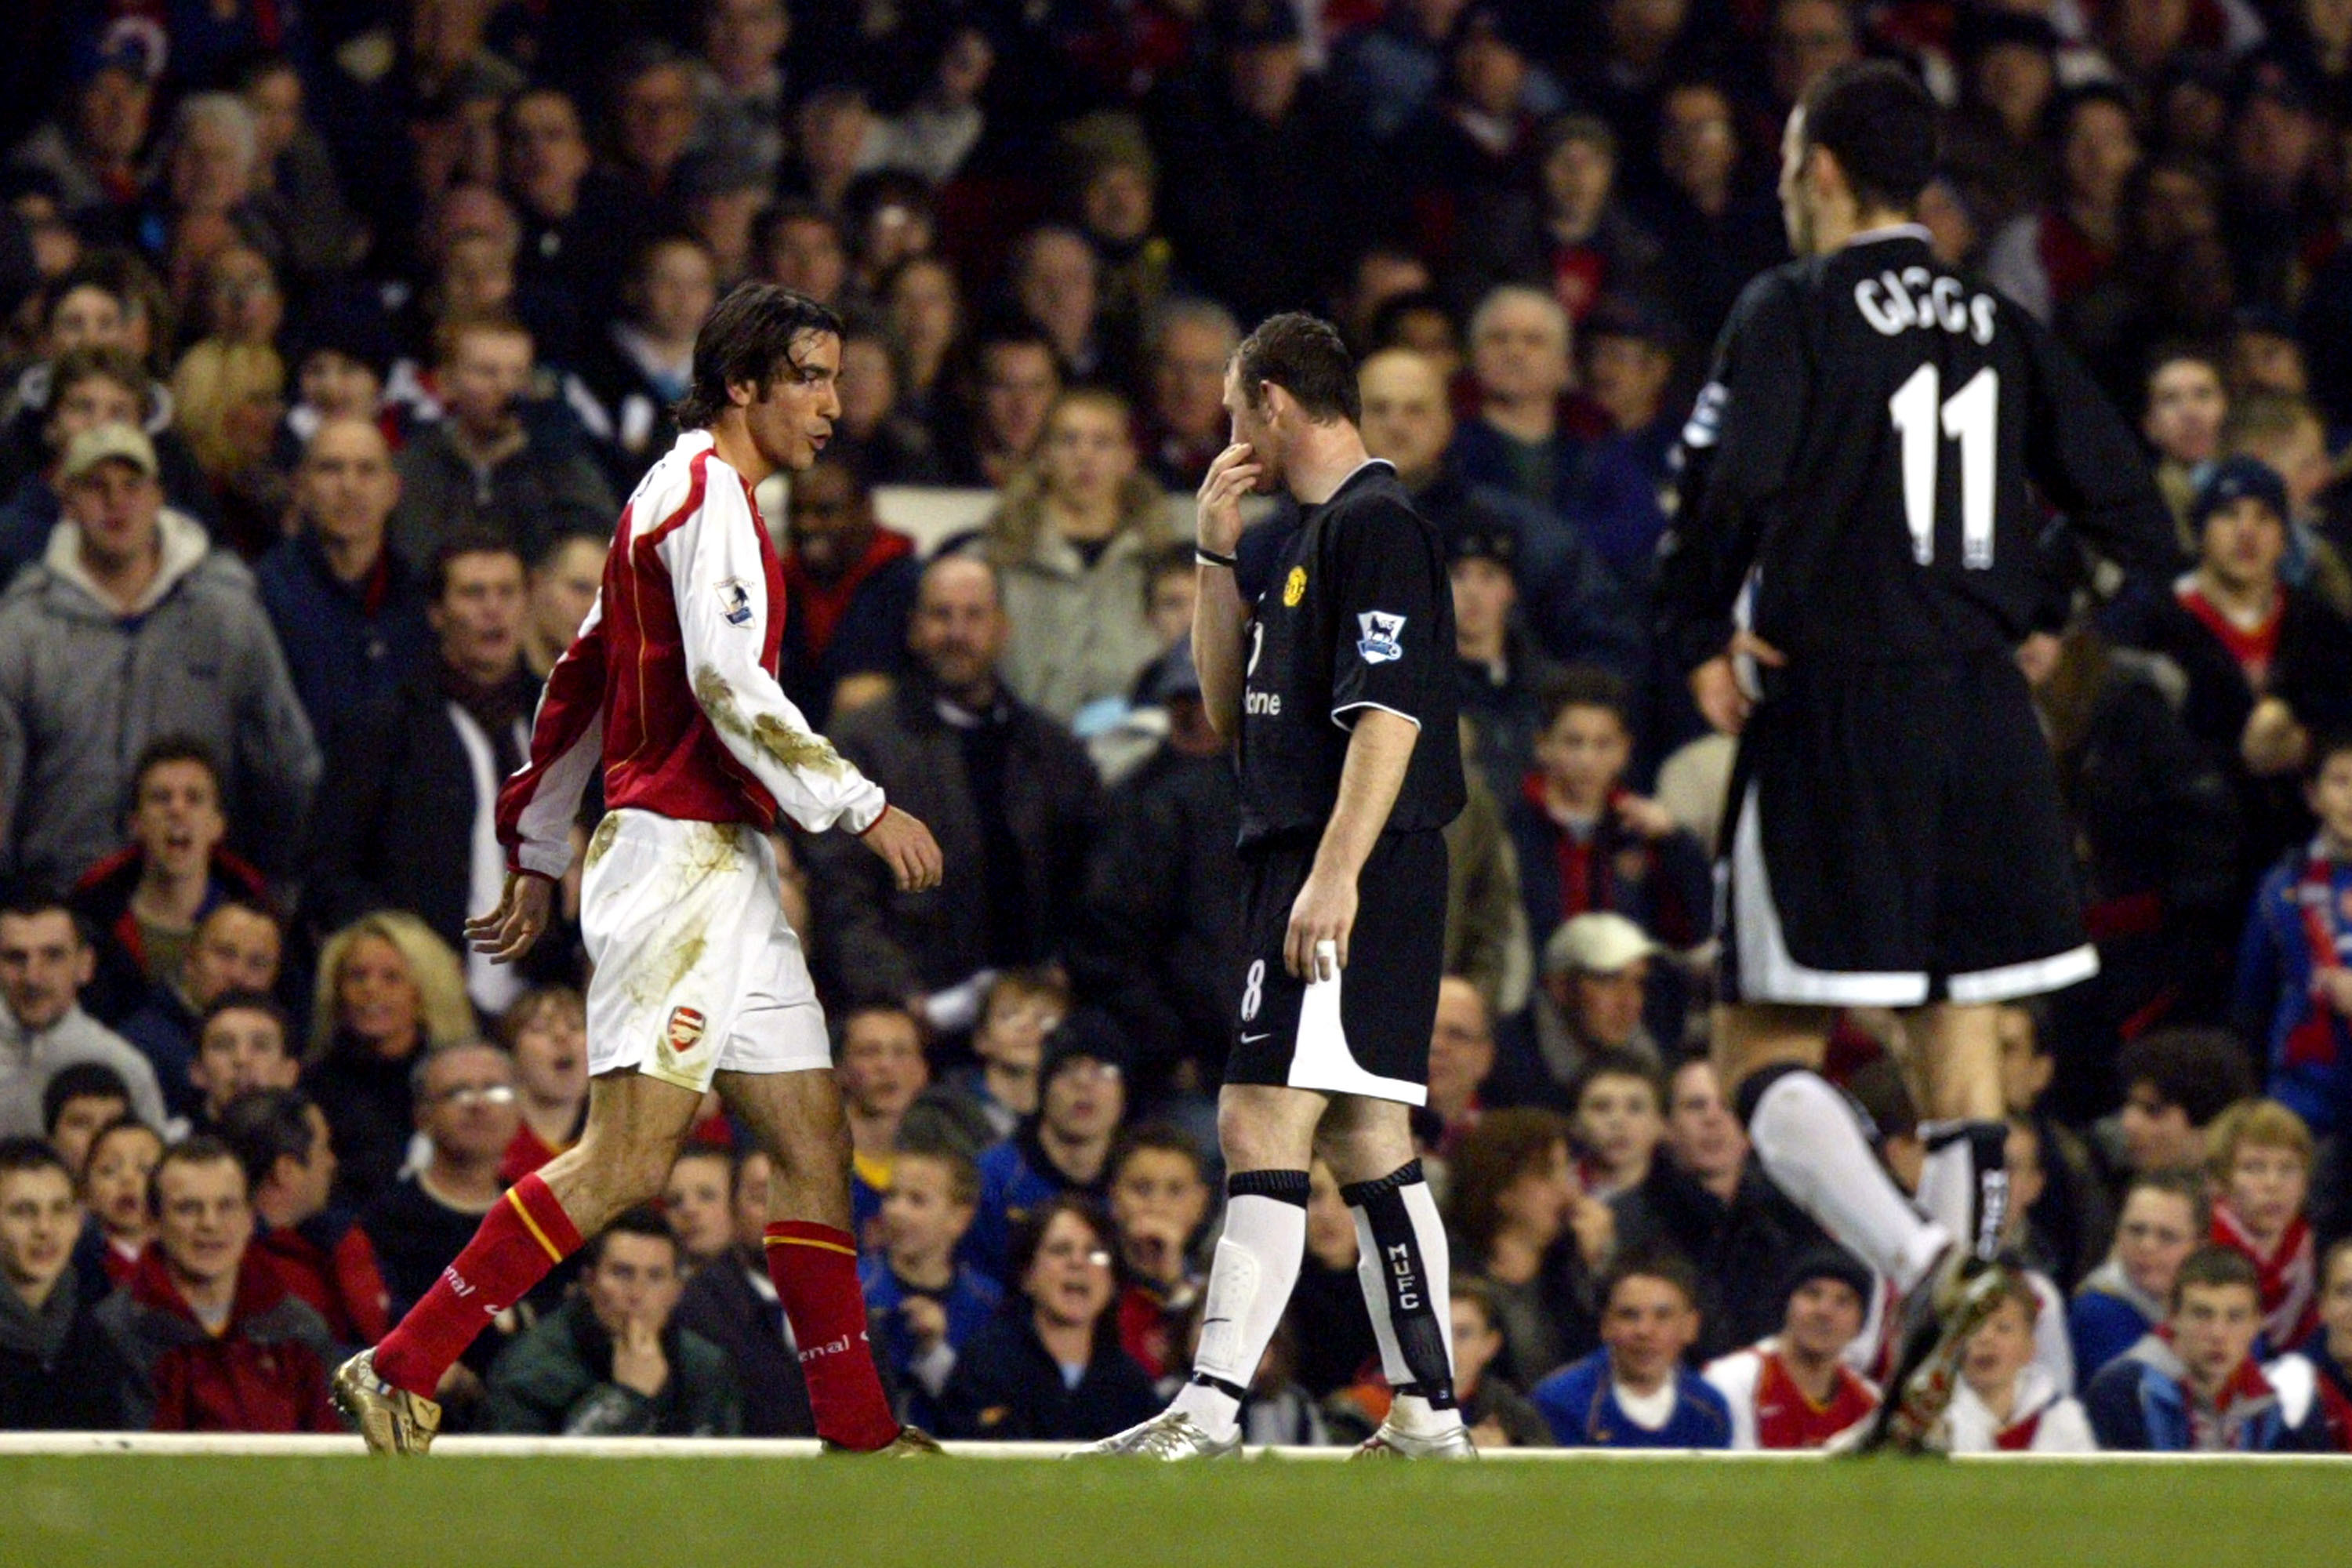 Arsenal's Robert Pires and Manchester United's Wayne Rooney